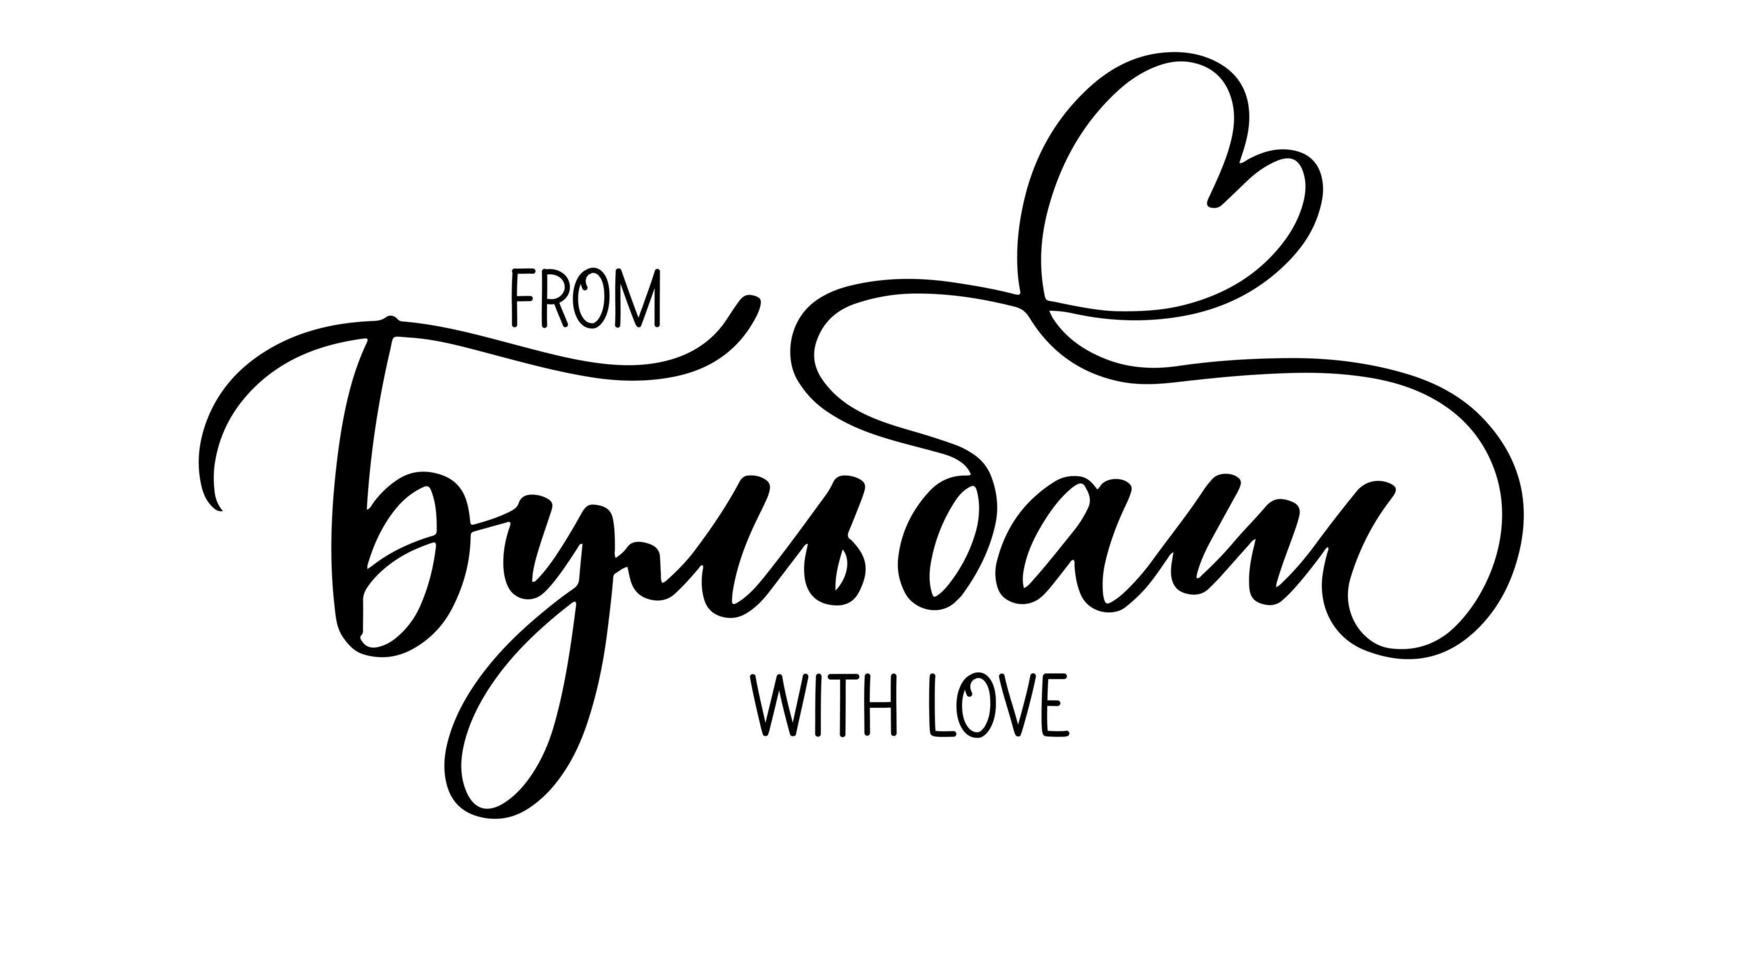 From Bulbash with love - Belarusian man lettering in Belarusian. vector